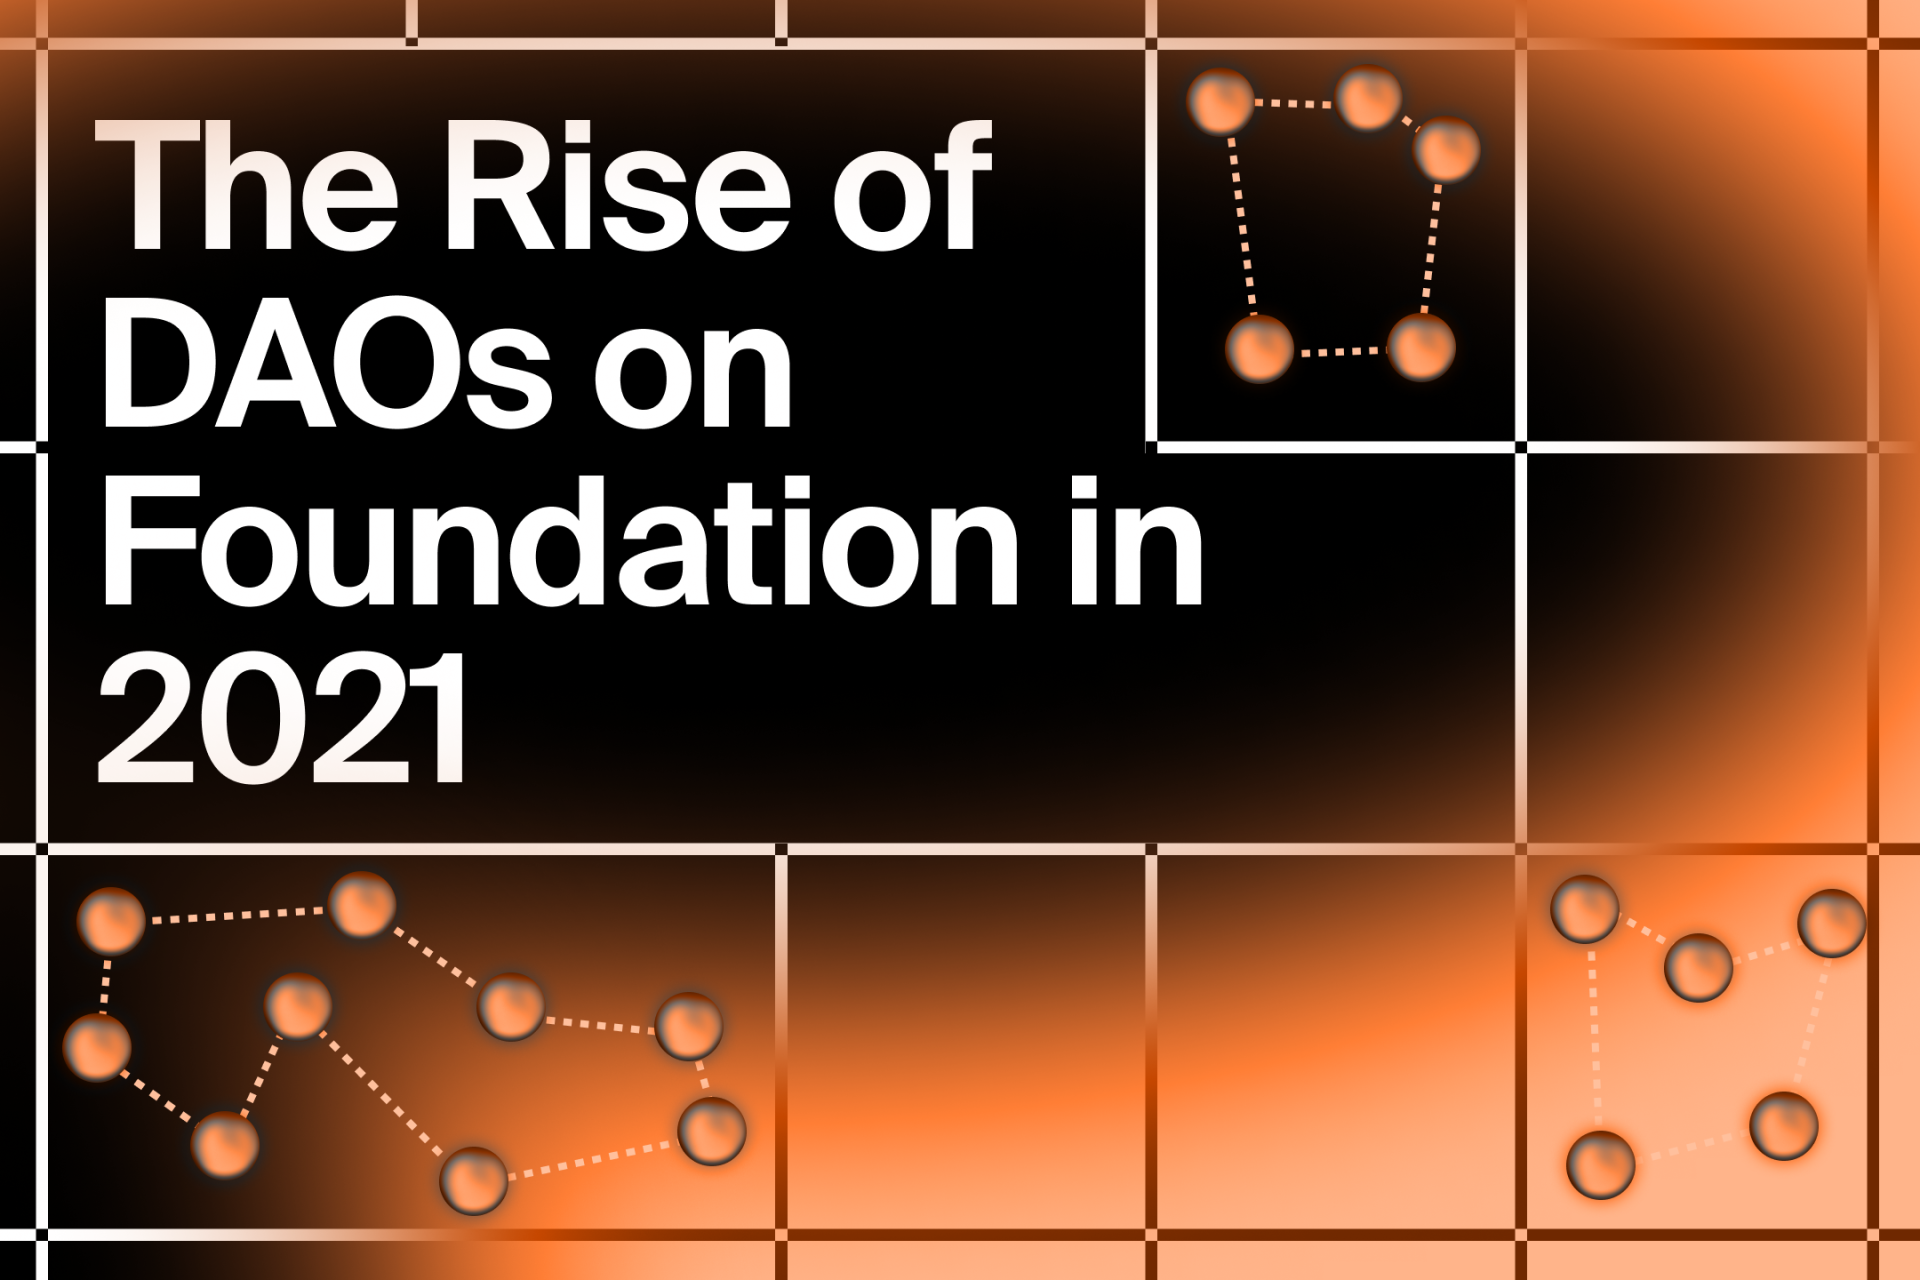 The Rise of DAOs on Foundation in 2021